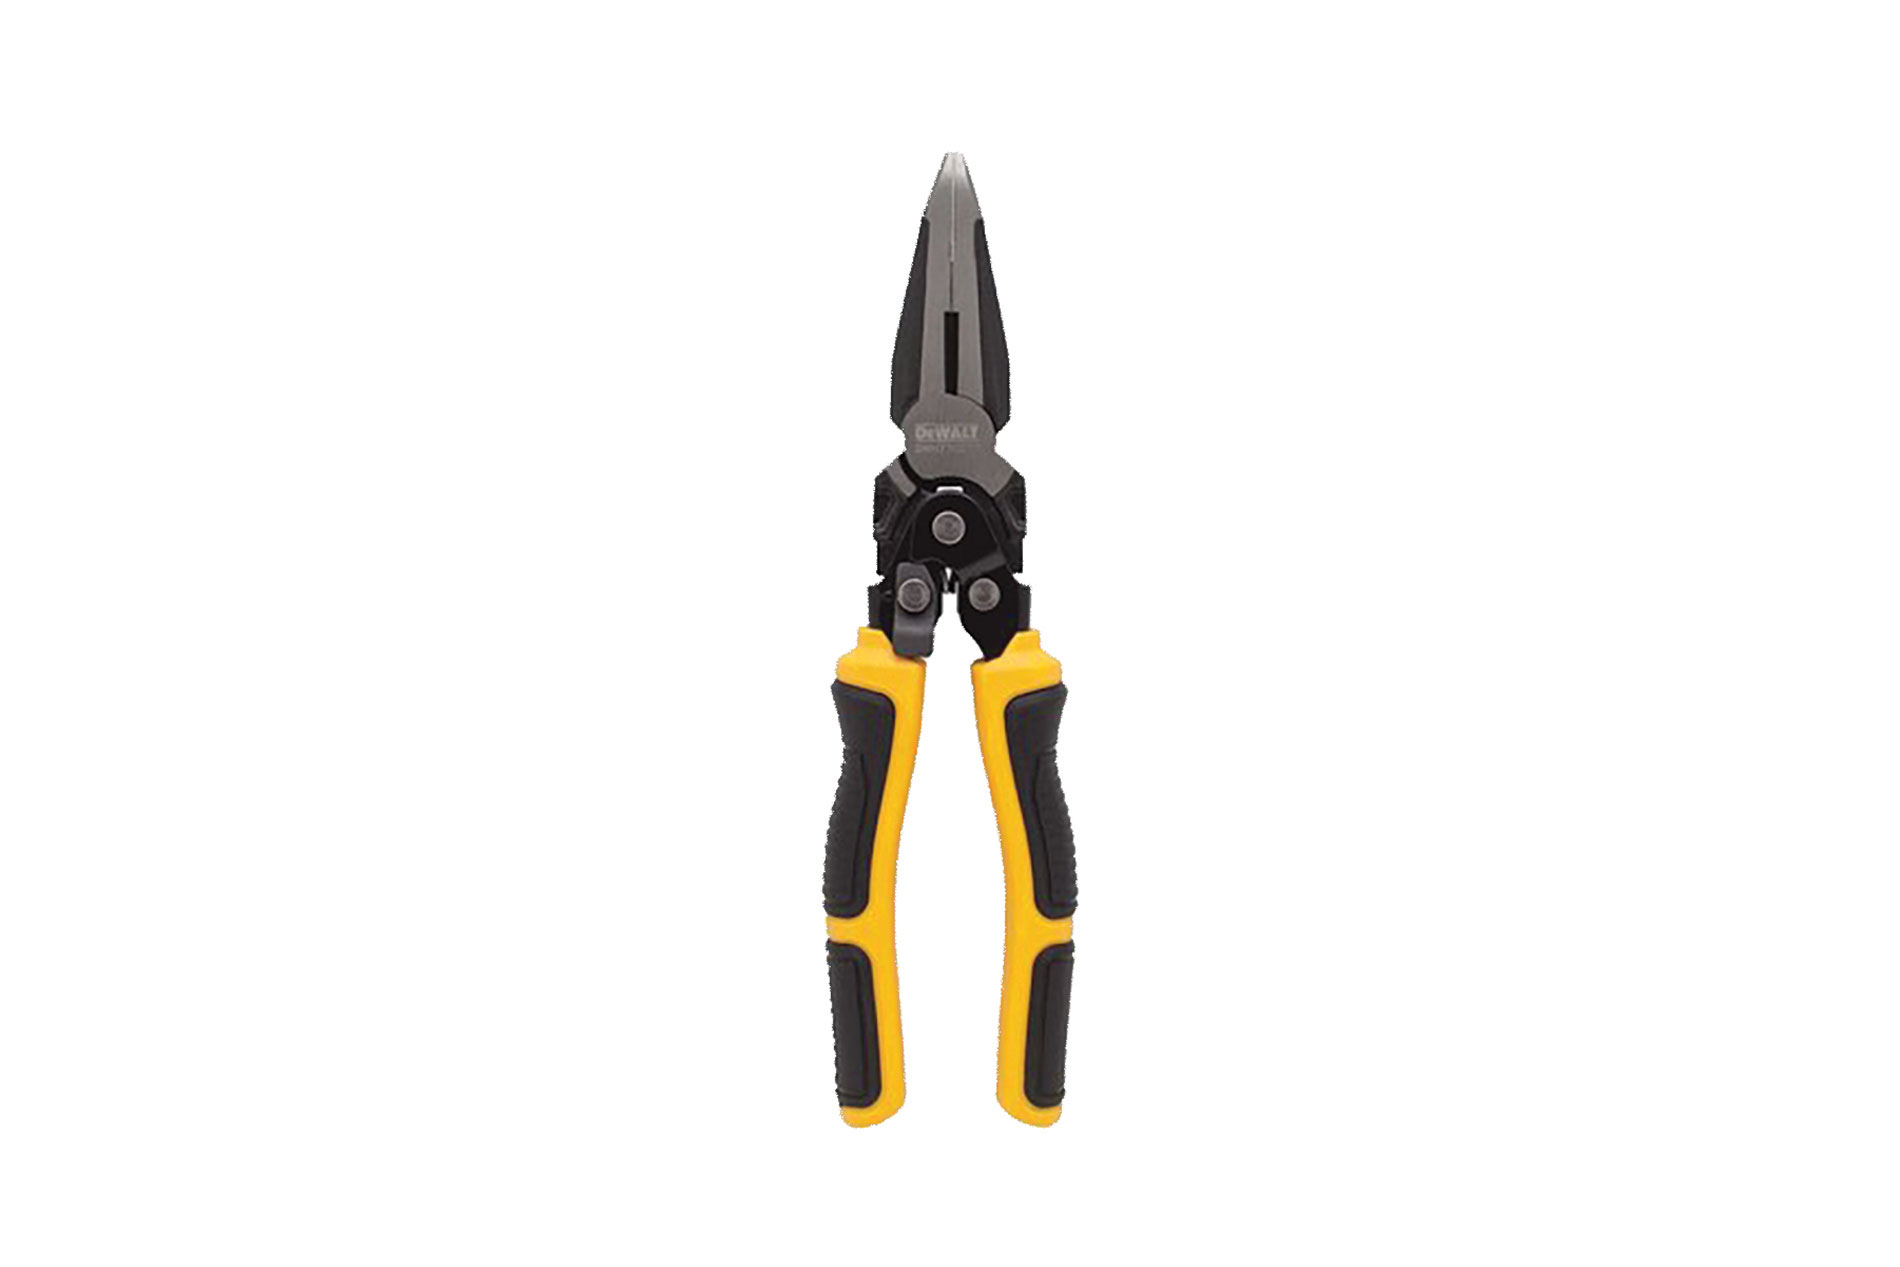 Black and yellow pliers. Image by DeWalt.